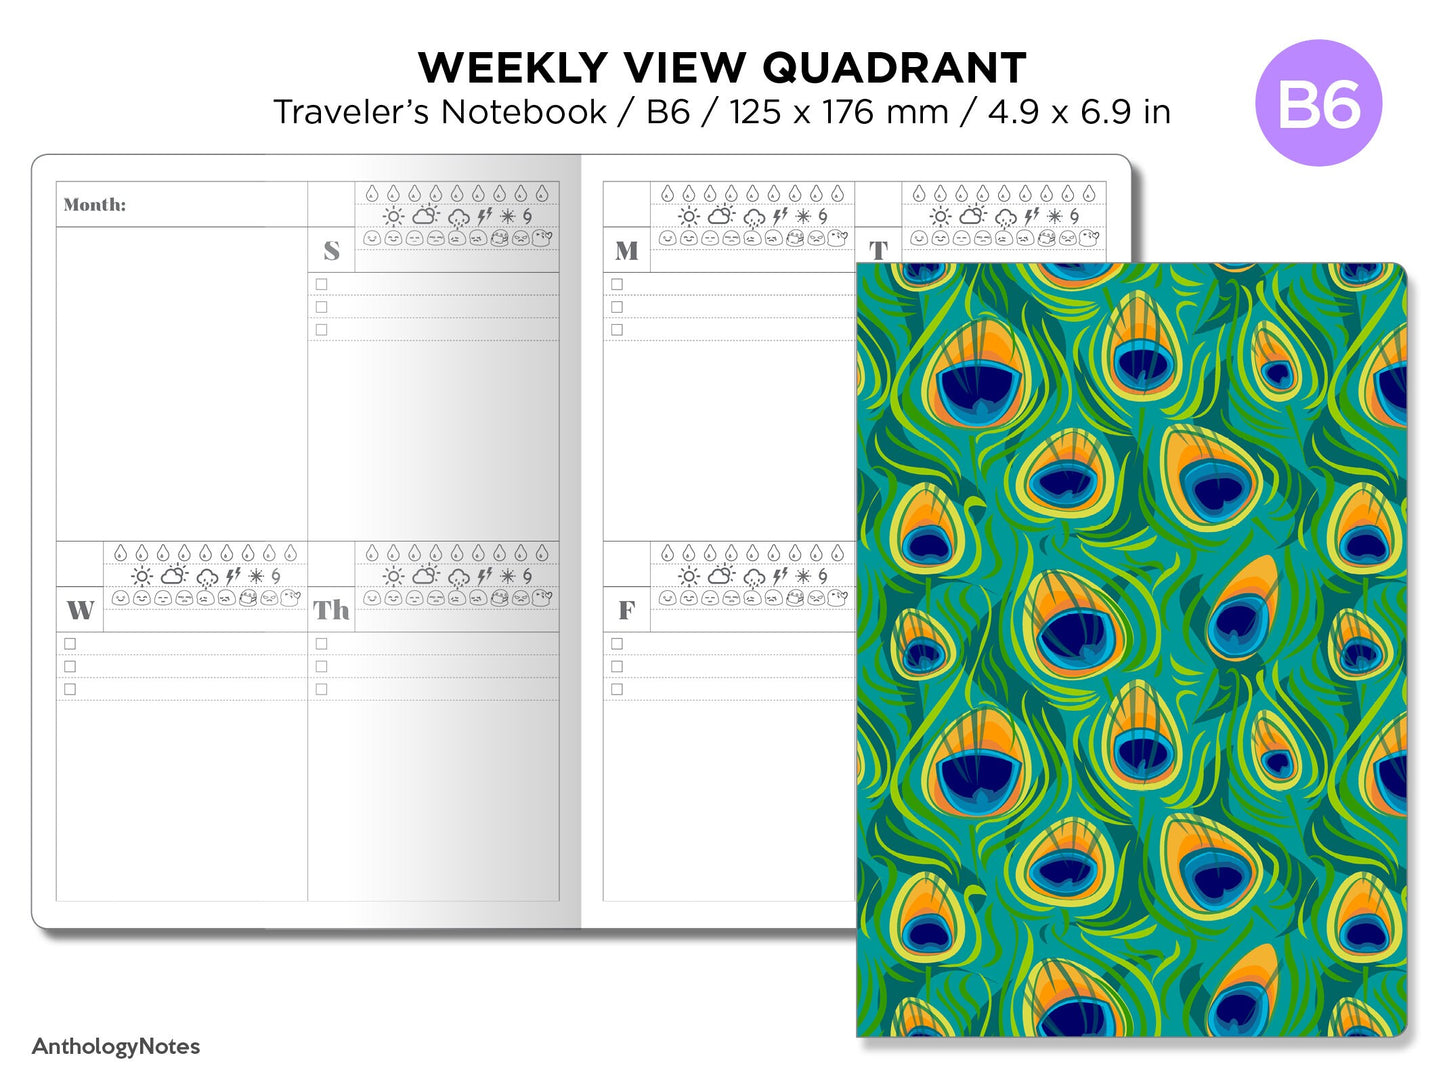 B6 Weekly Traveler's Notebook Mood, Weather and Water tracker Vertical Quadrant Layout